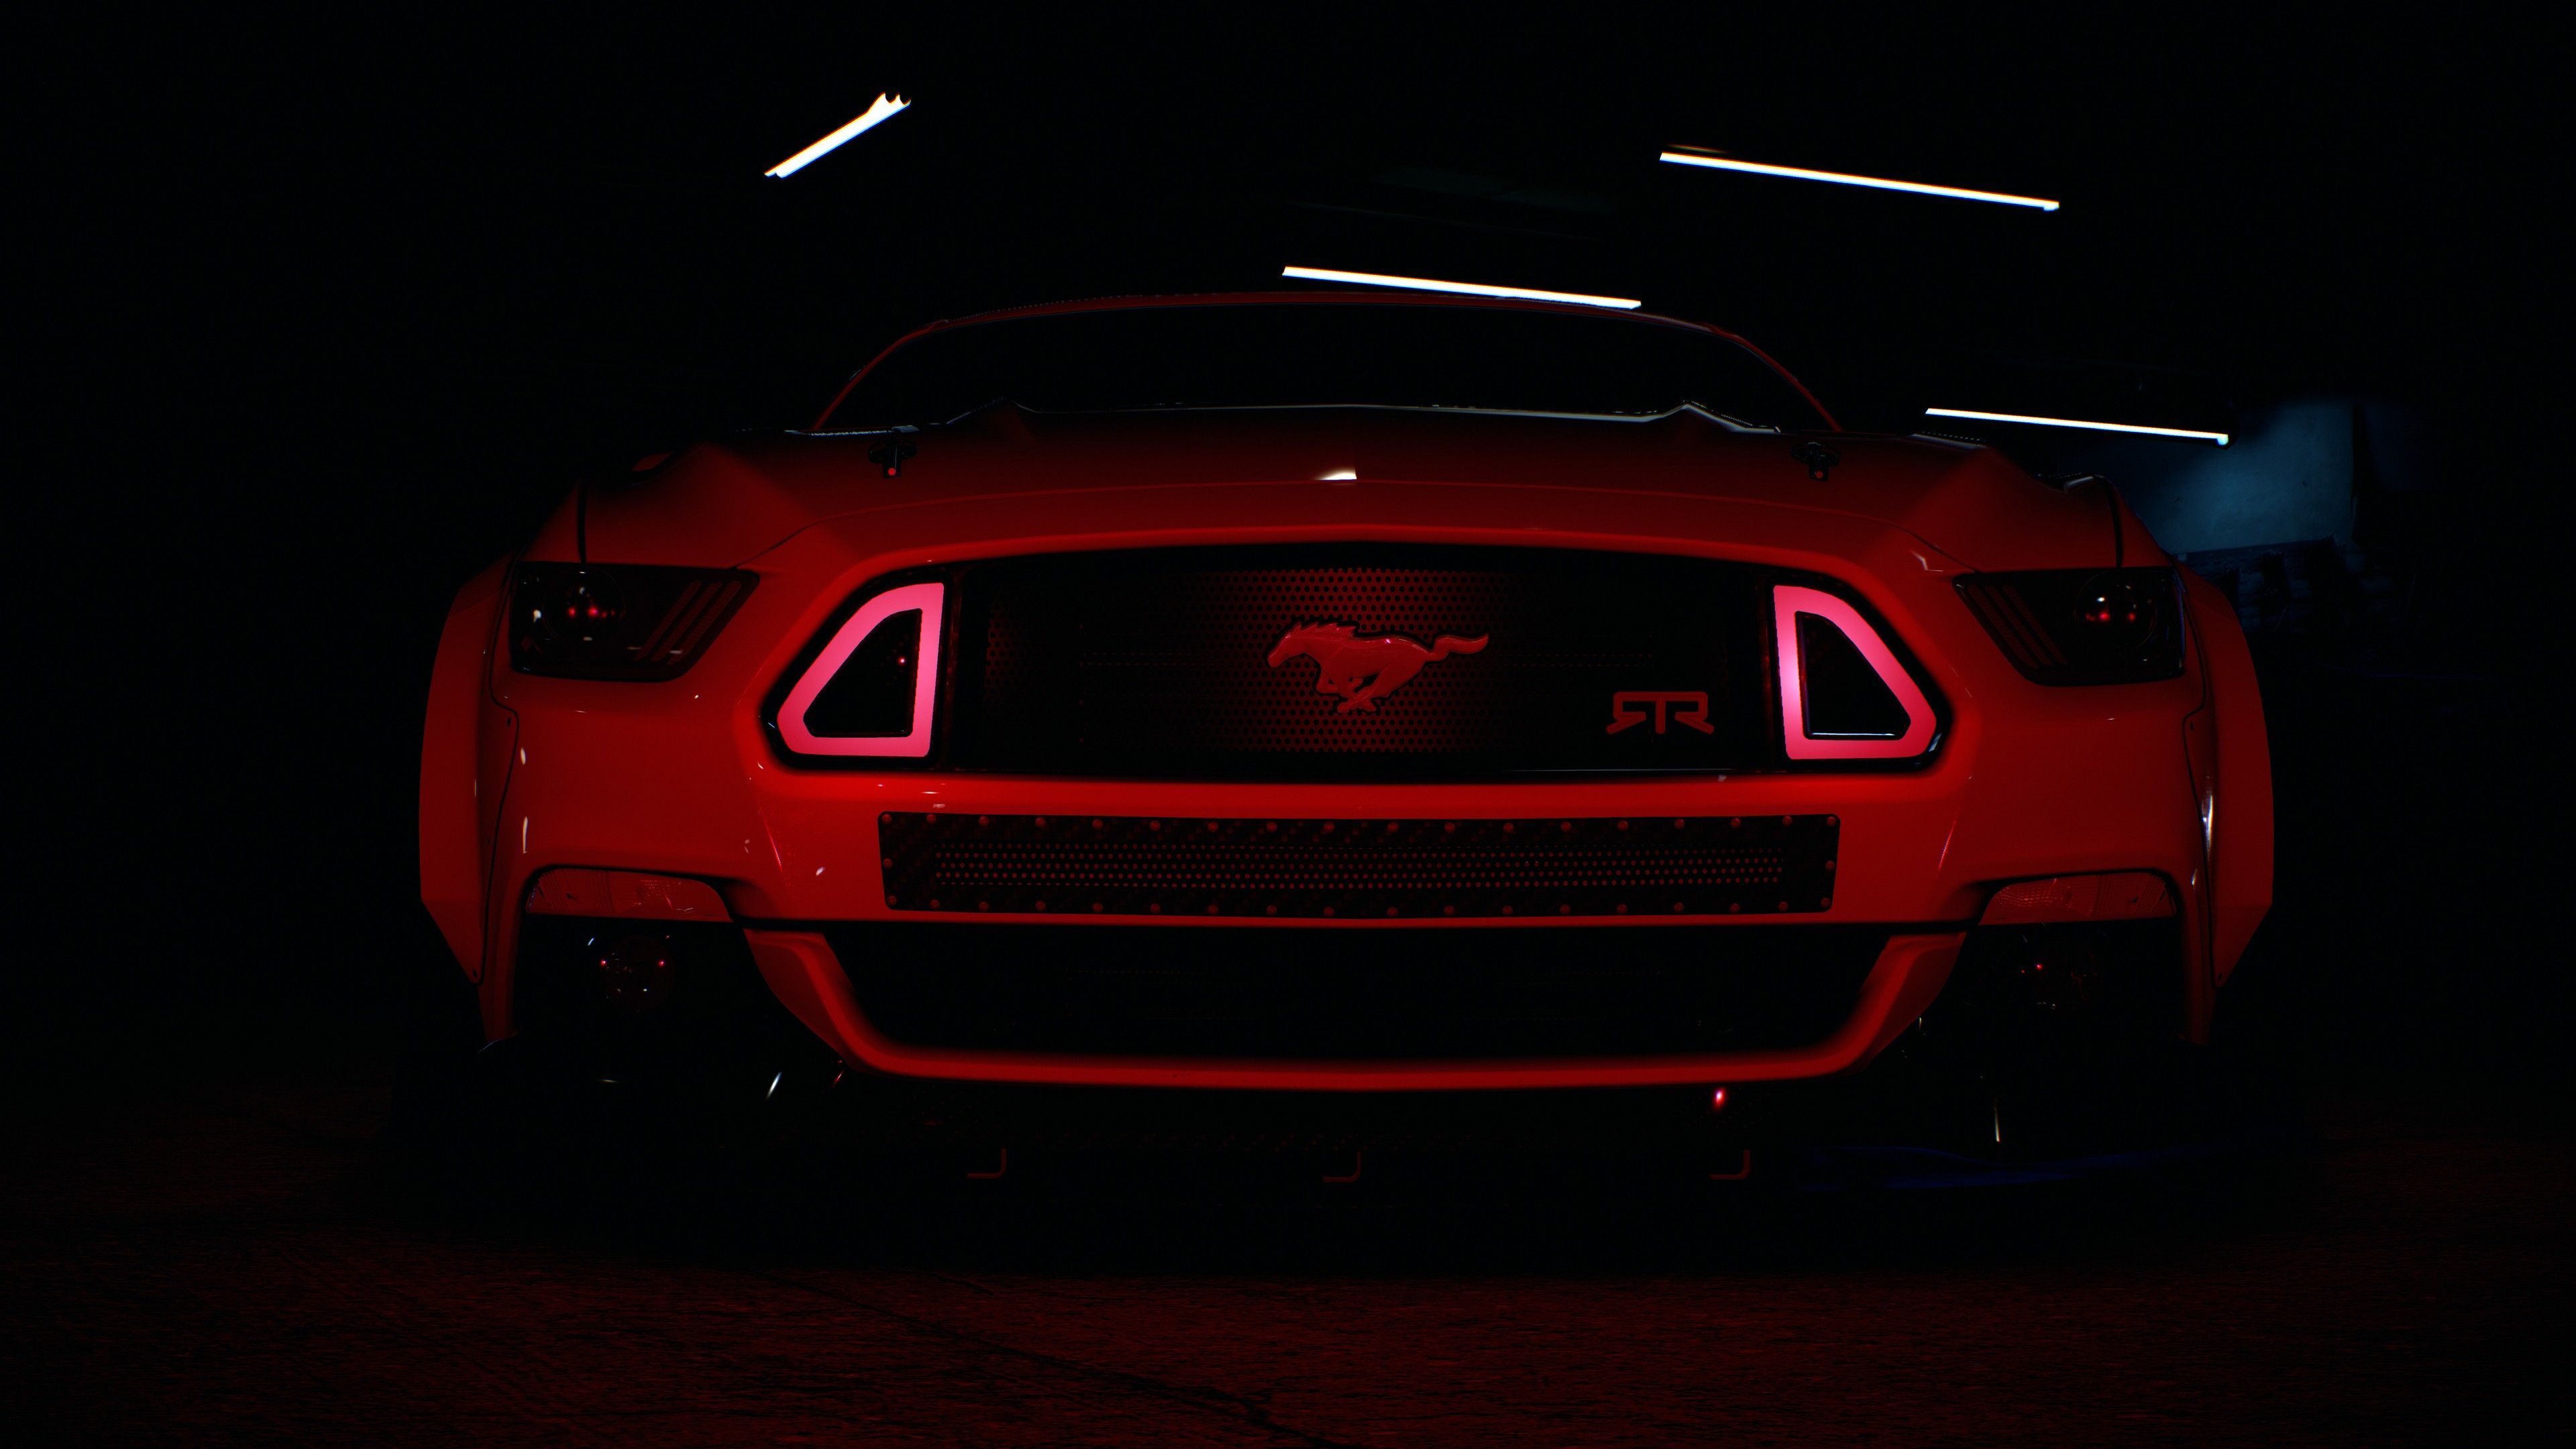 Need For Speed Ford Mustang Need For Speed Wallpaper, Hd Wallpaper, Ford Mustang Wallpaper, Cars Wallpaper. Mustang Wallpaper, Ford Mustang Wallpaper, Mustang